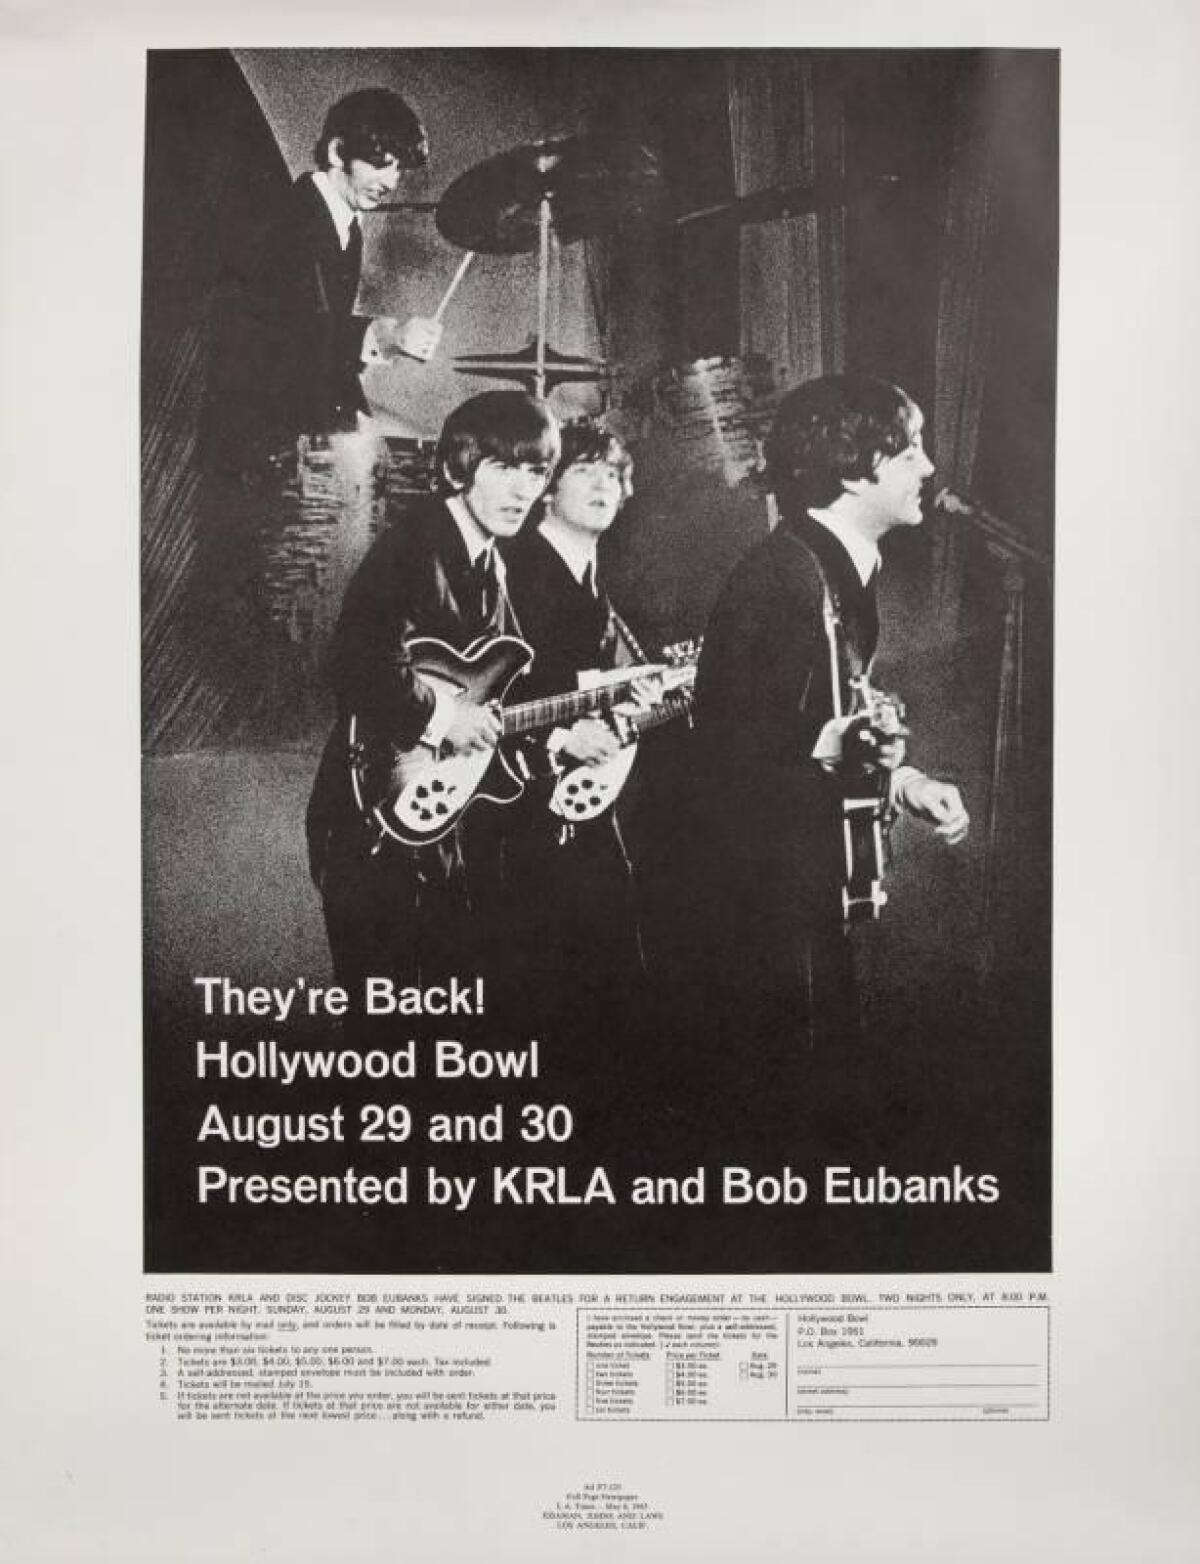 Original poster for the Beatles 1965 concerts at the Hollywood Bowl (Capitol Records Archives)